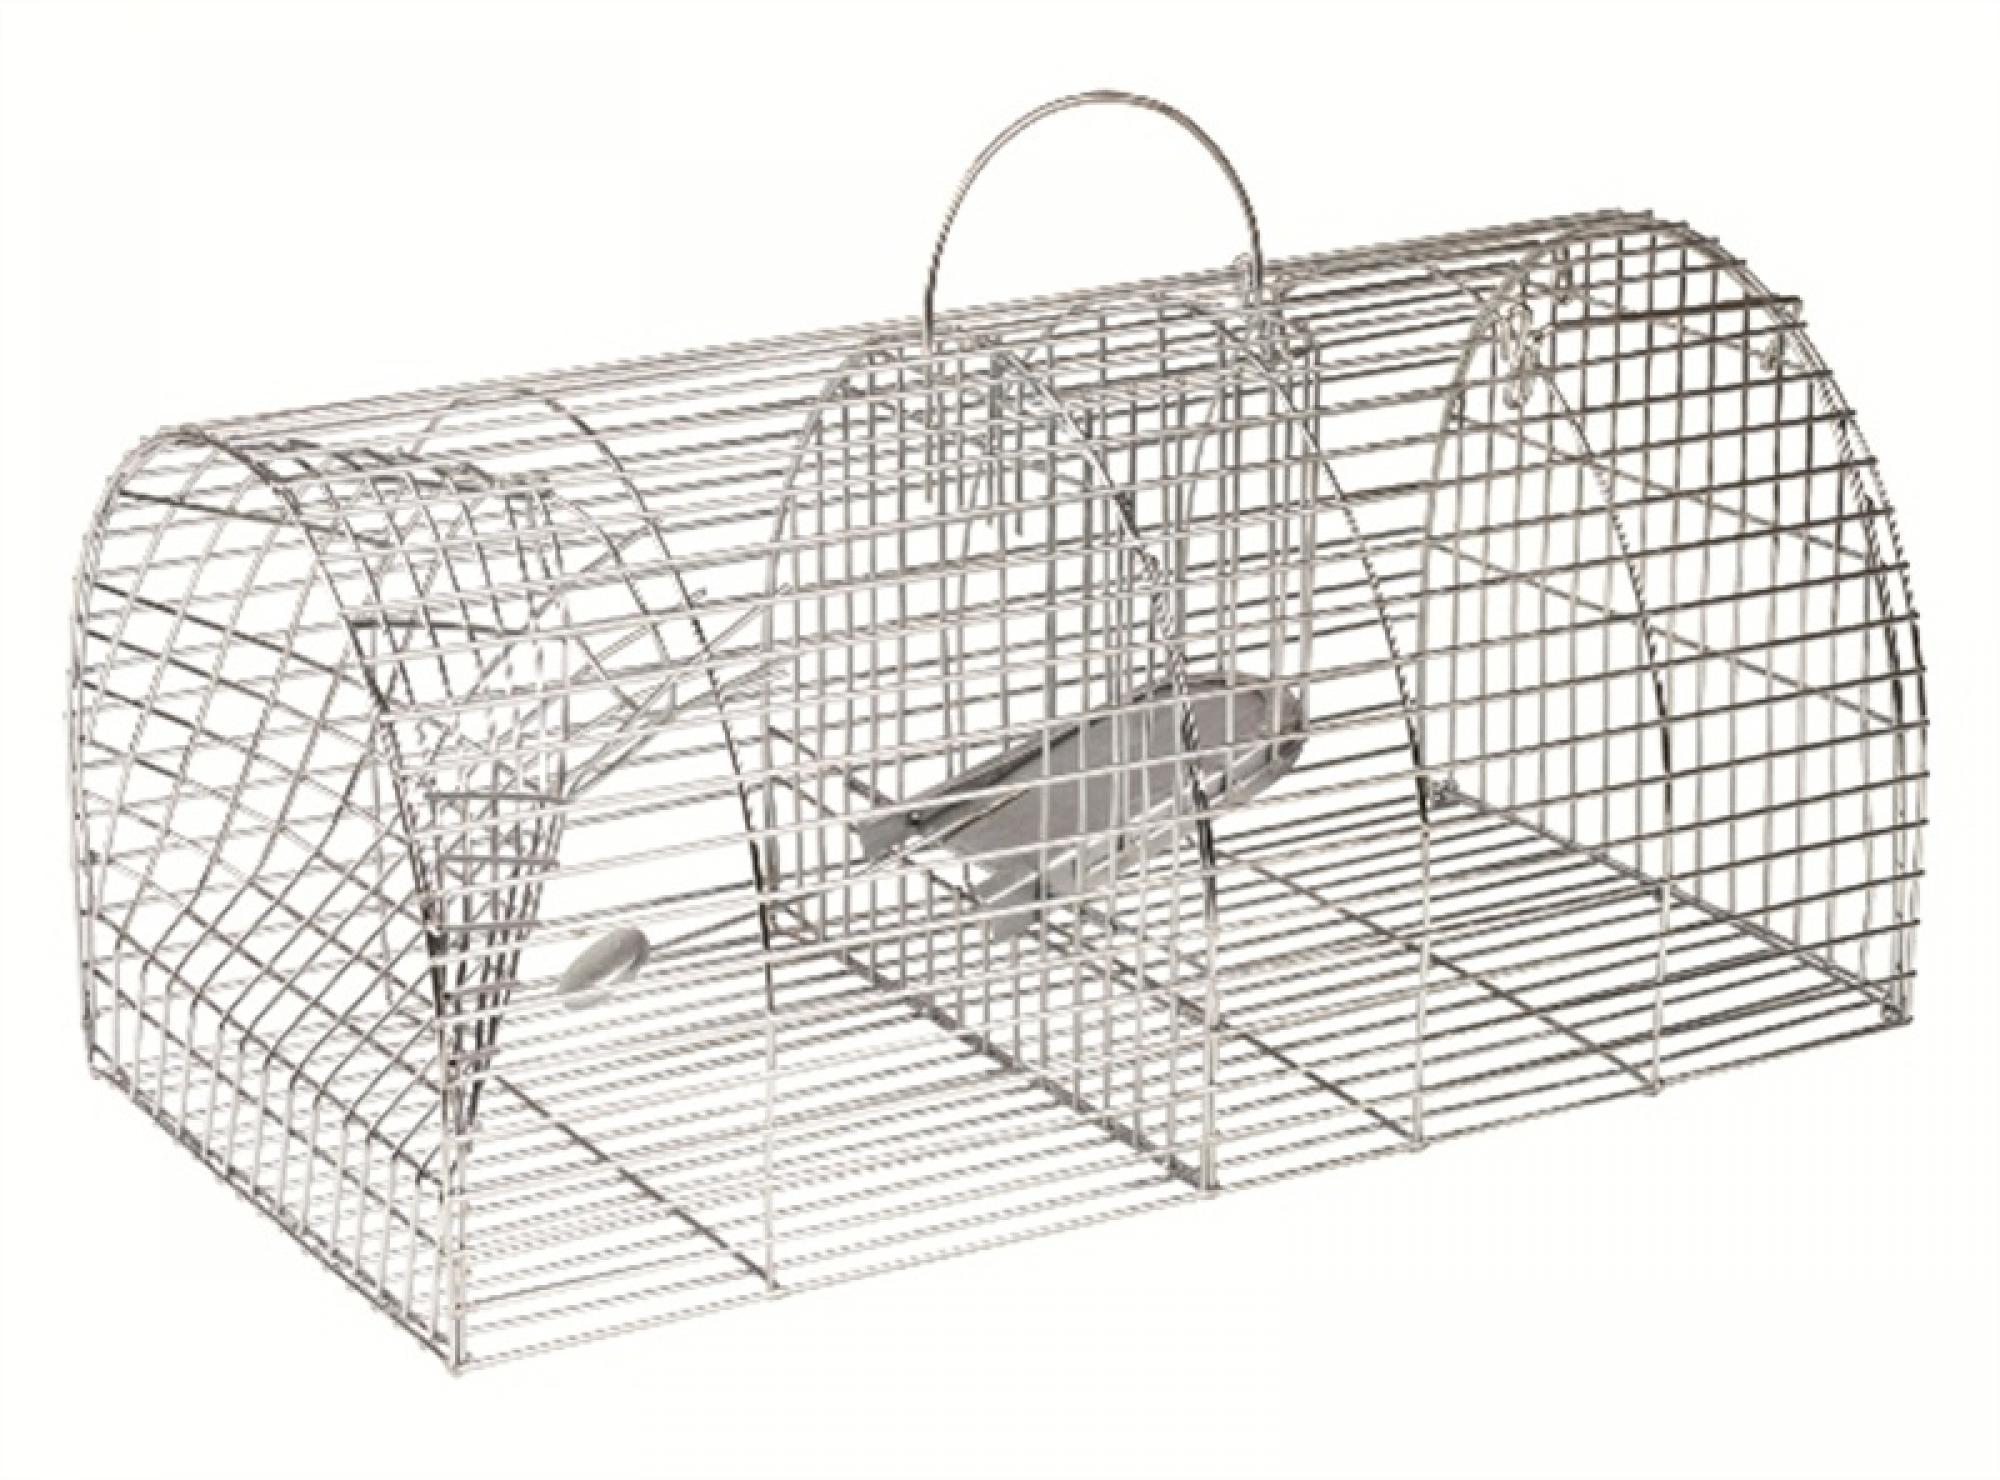 Buy Multi Catch Rat Cage Trap from Fane Valley Stores Agricultural Supplies